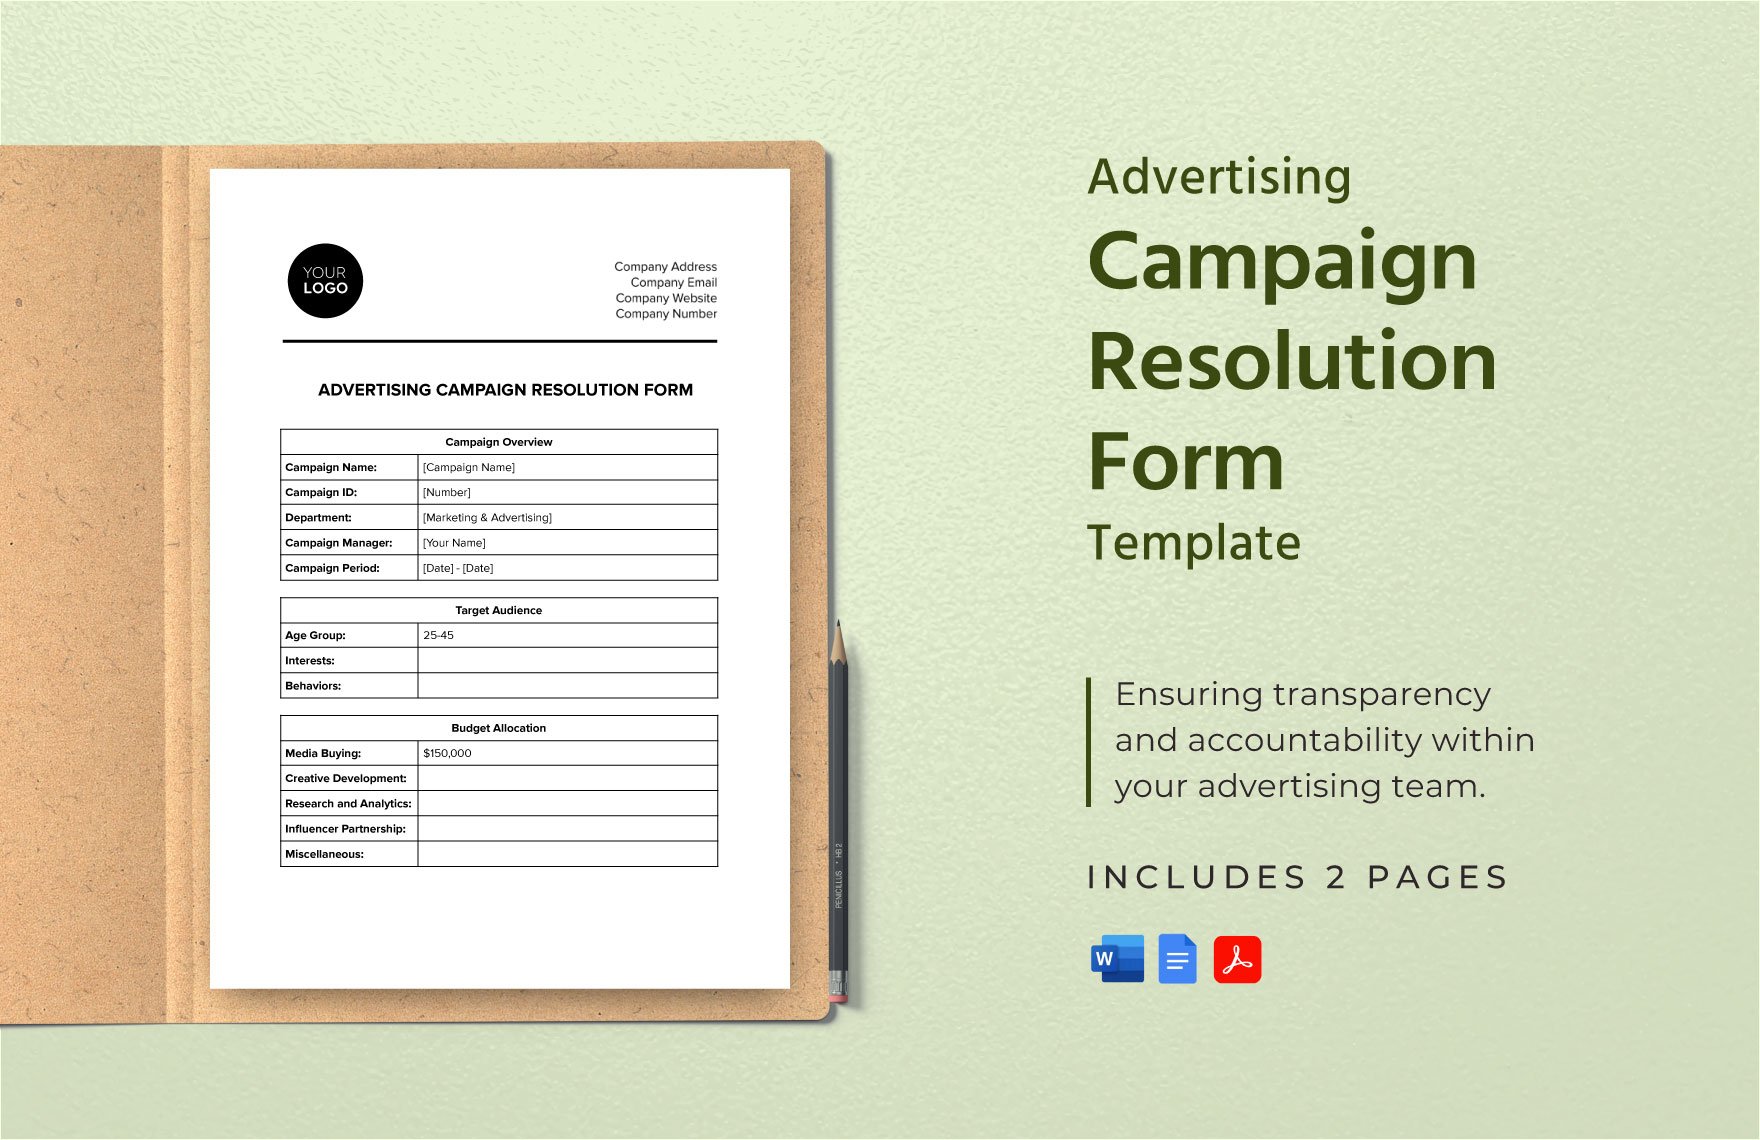 Advertising Campaign Resolution Form Template in Word, Google Docs, PDF